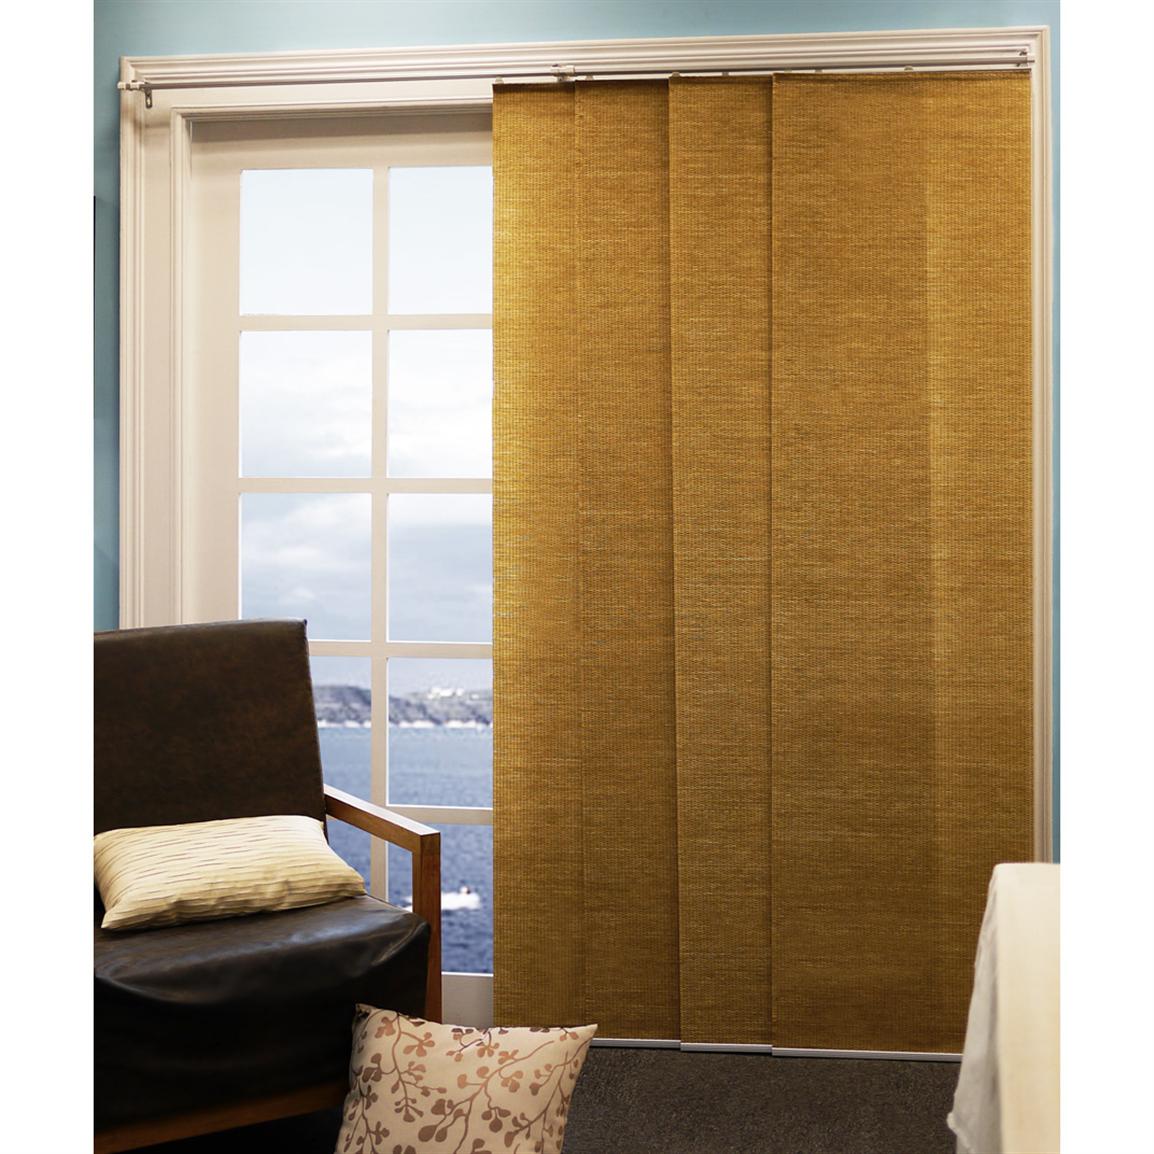 Junior Loft Bed Curtains Curtain Rods for Sliding Glass